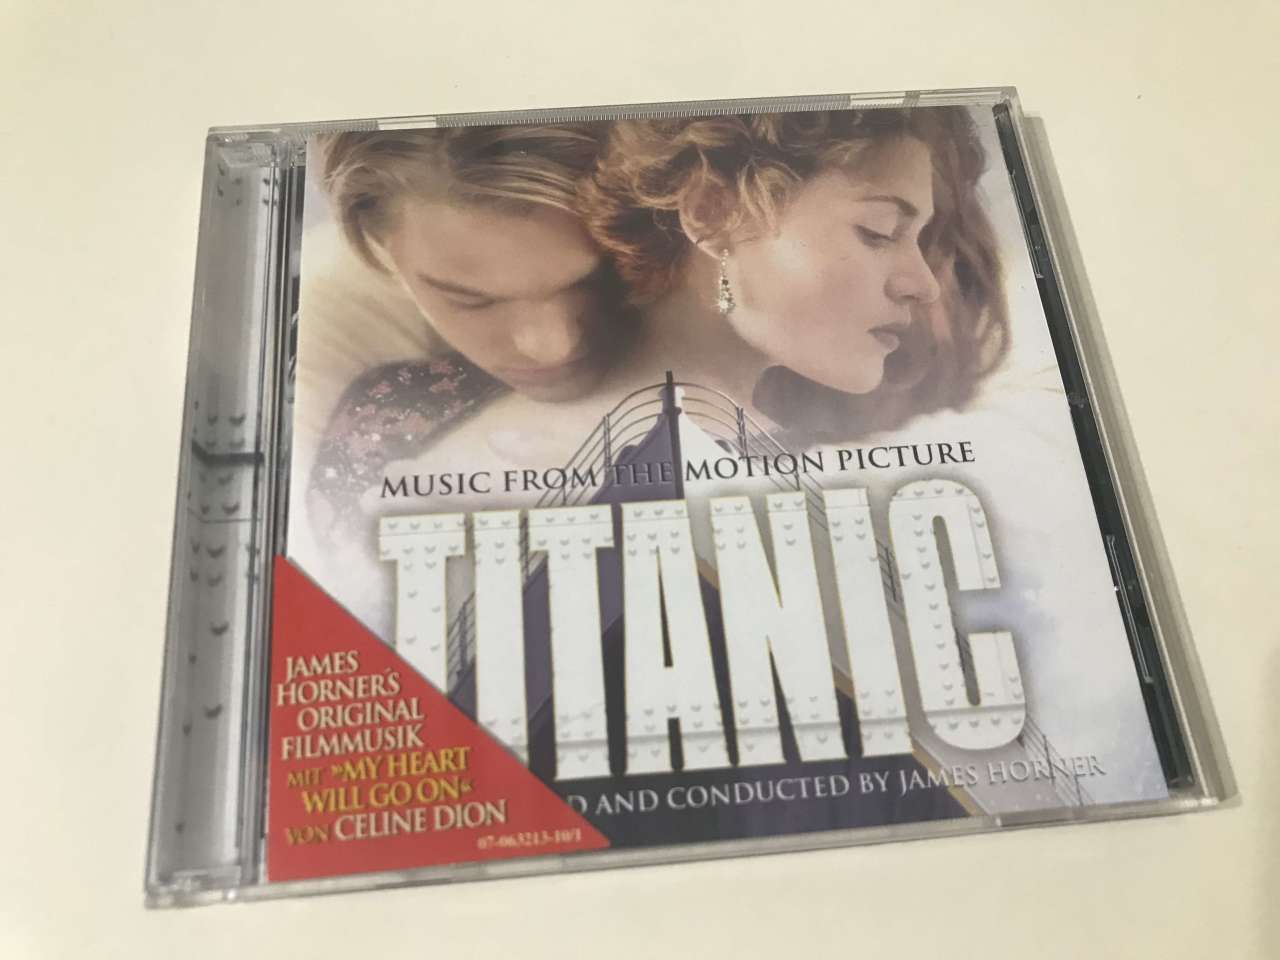 Titanic (Music From The Motion Picture)